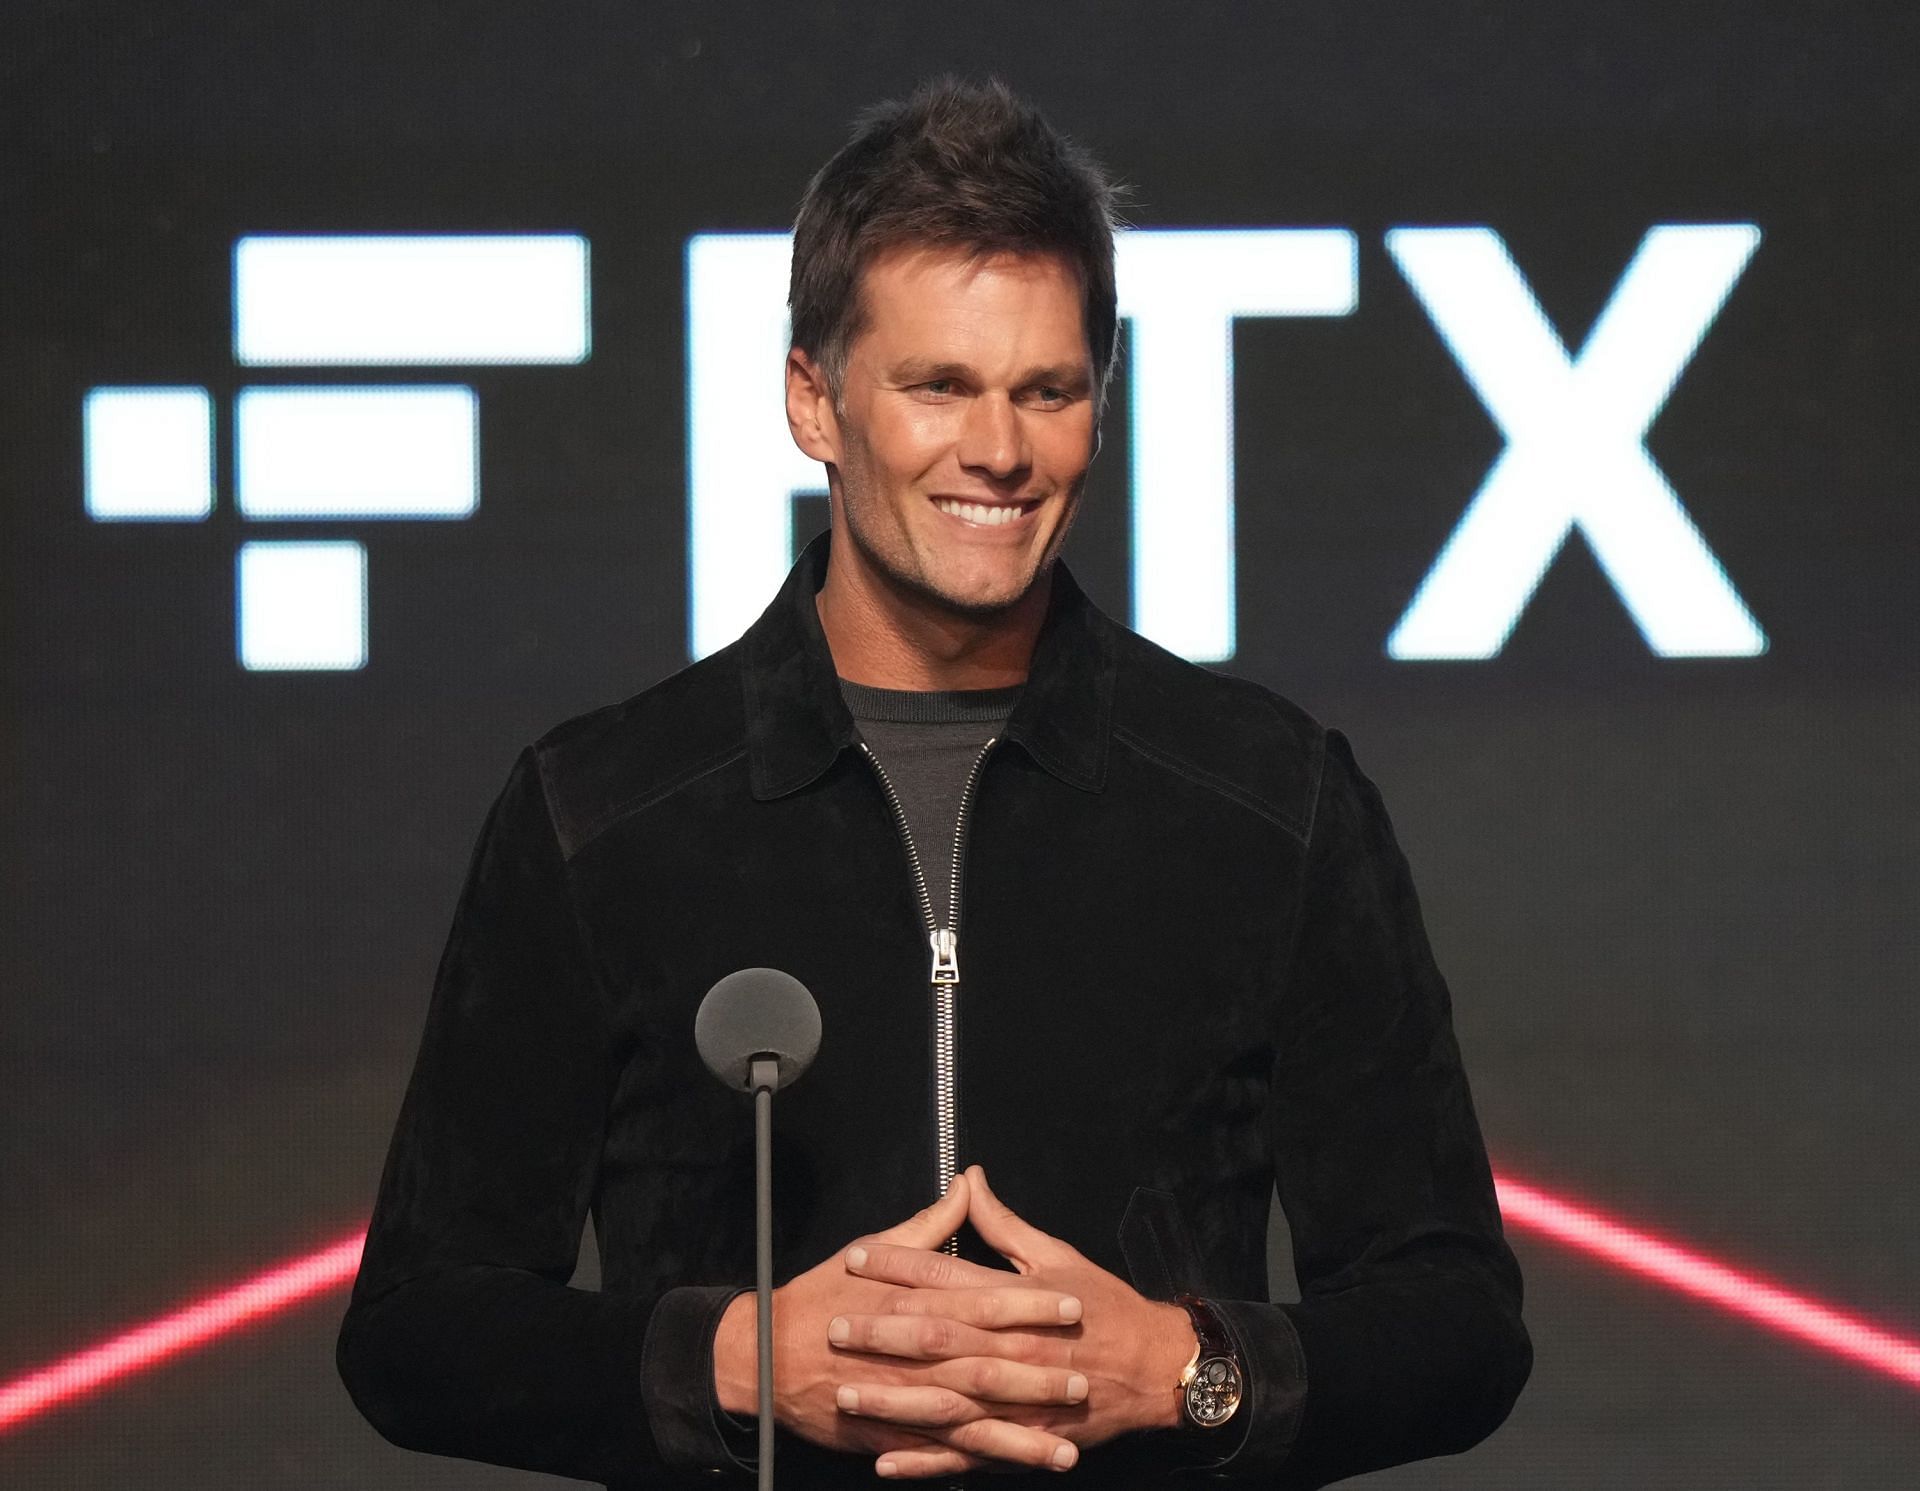 Tom Brady at the 2021 Sports Illustrated Awards